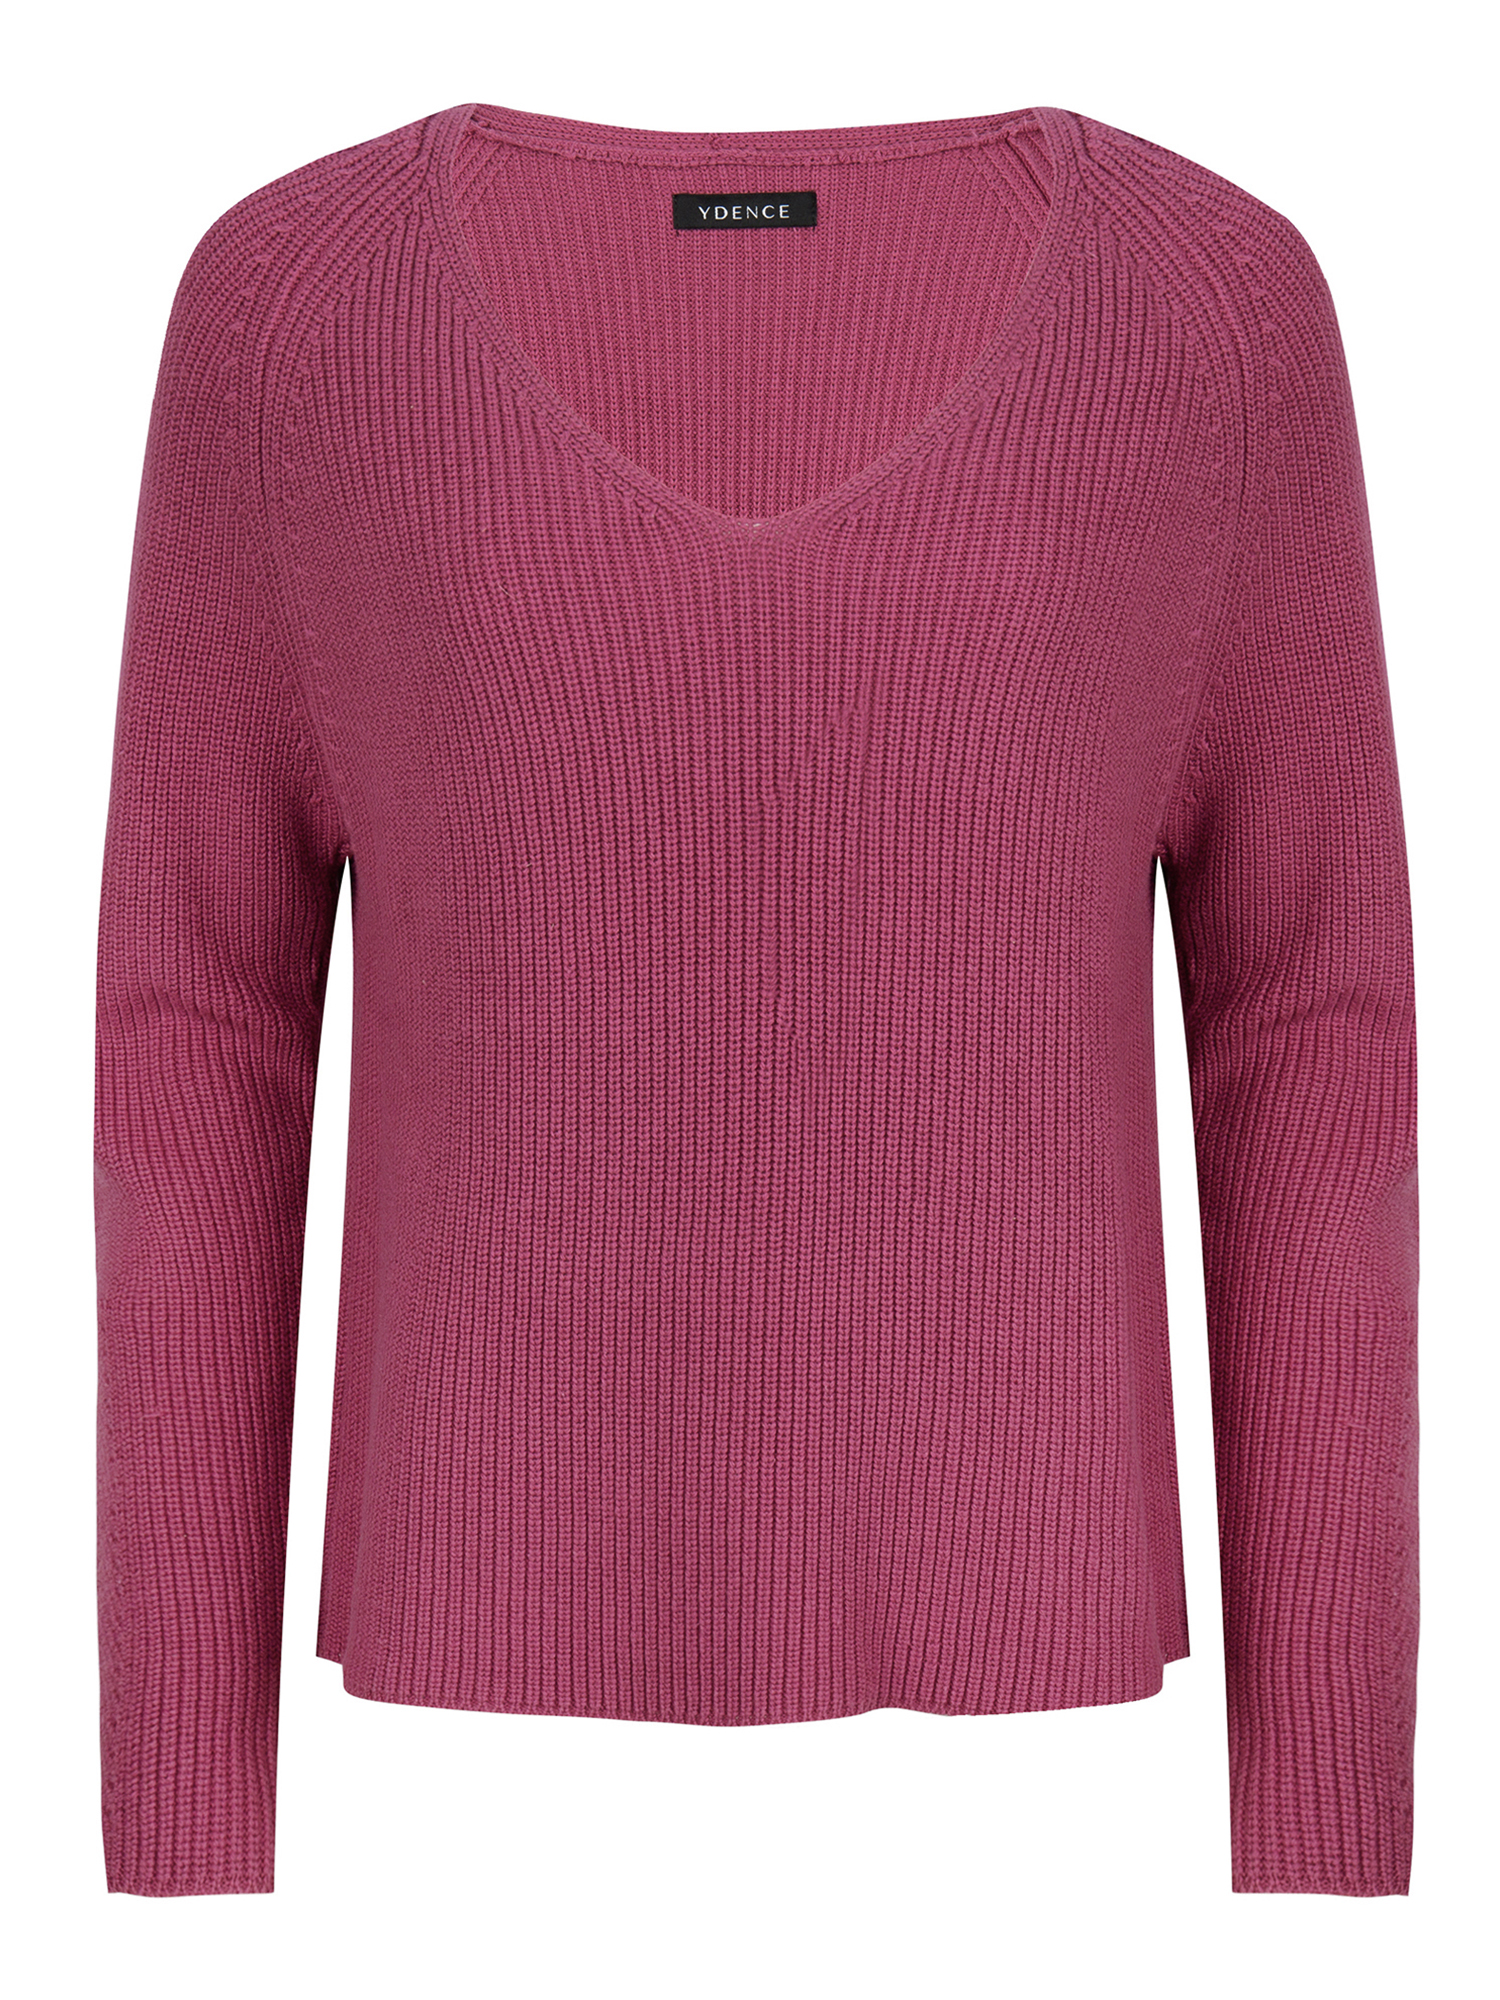 Ydence Knitted Sweater Tess Purple